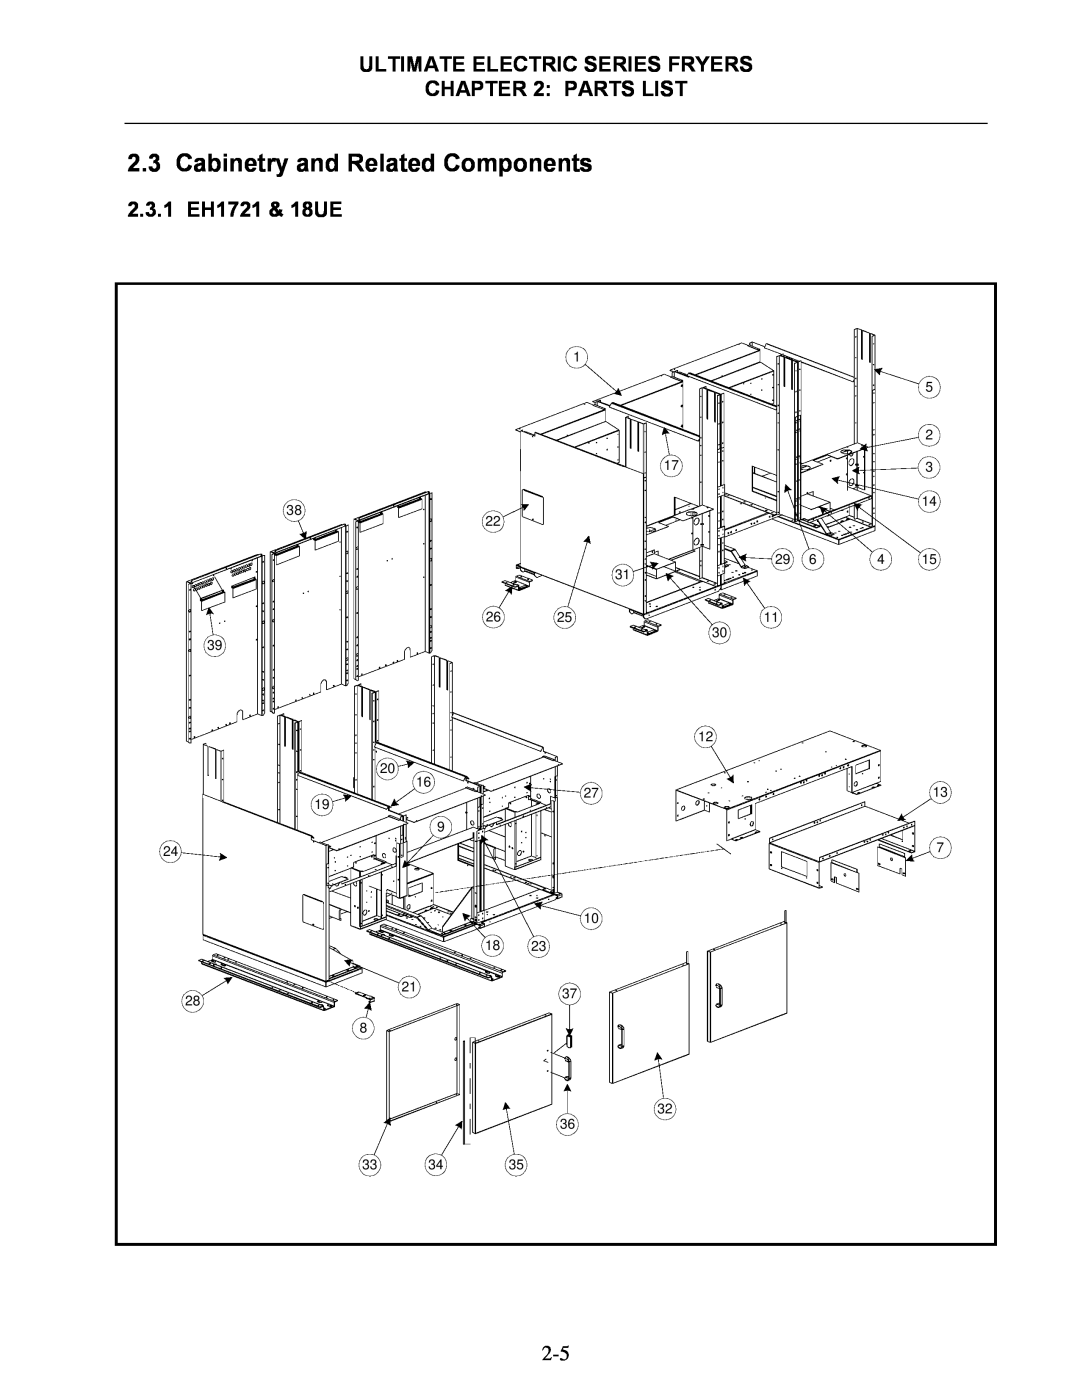 Frymaster manual Cabinetry and Related Components, 2.3.1 EH1721 & 18UE, Ultimate Electric Series Fryers, Parts List 